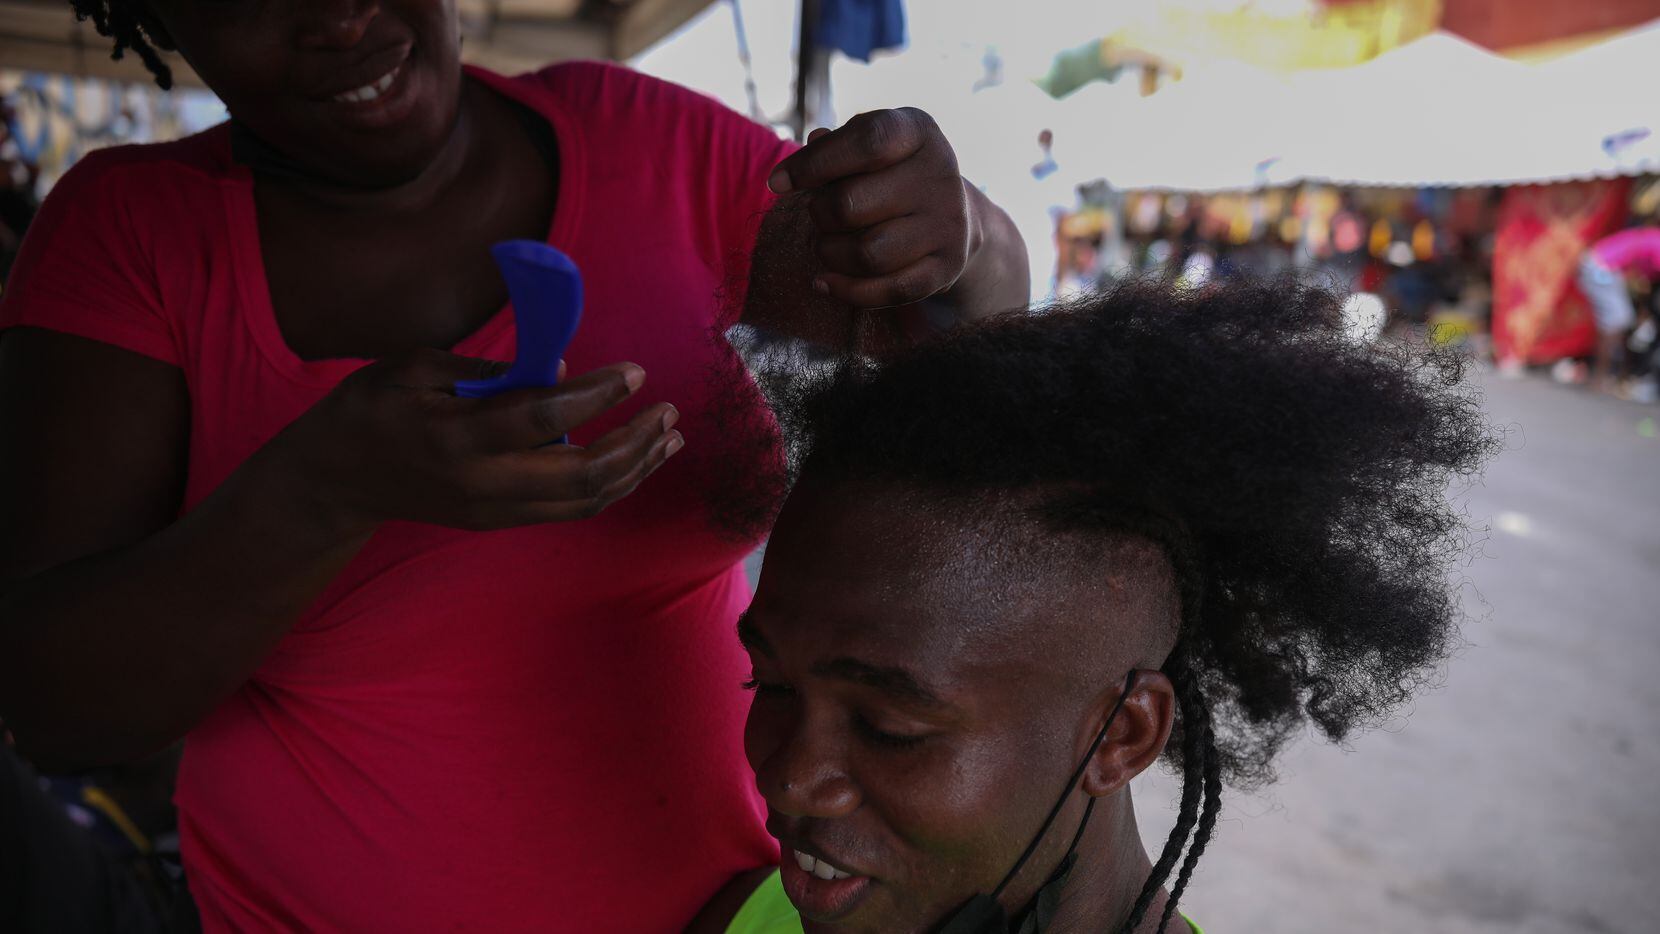 Jean Rodmique, 32, from Haiti, sits on a chair while his wife braids his hair, Wednesday,...